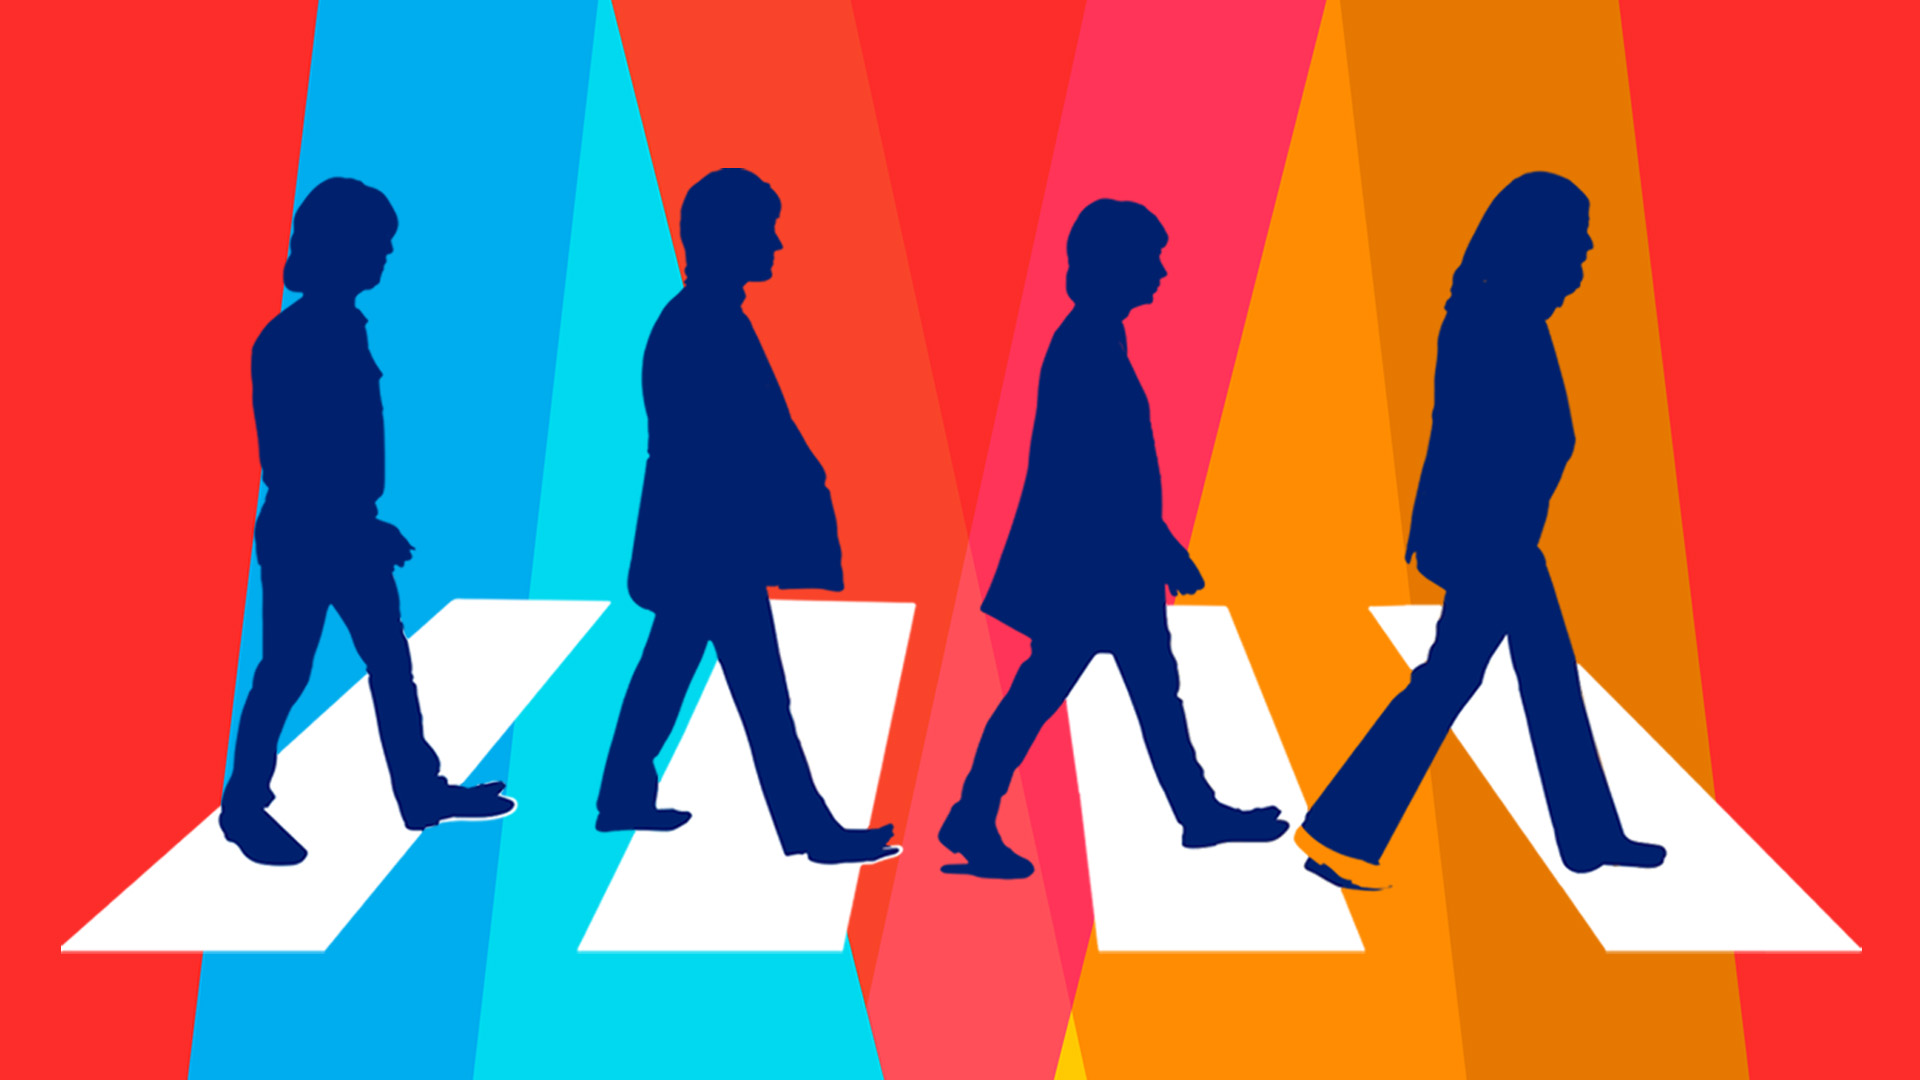 Graphic of four shadow figures representing the Beatles walking in a line. Orange and blue lights shine down on them.